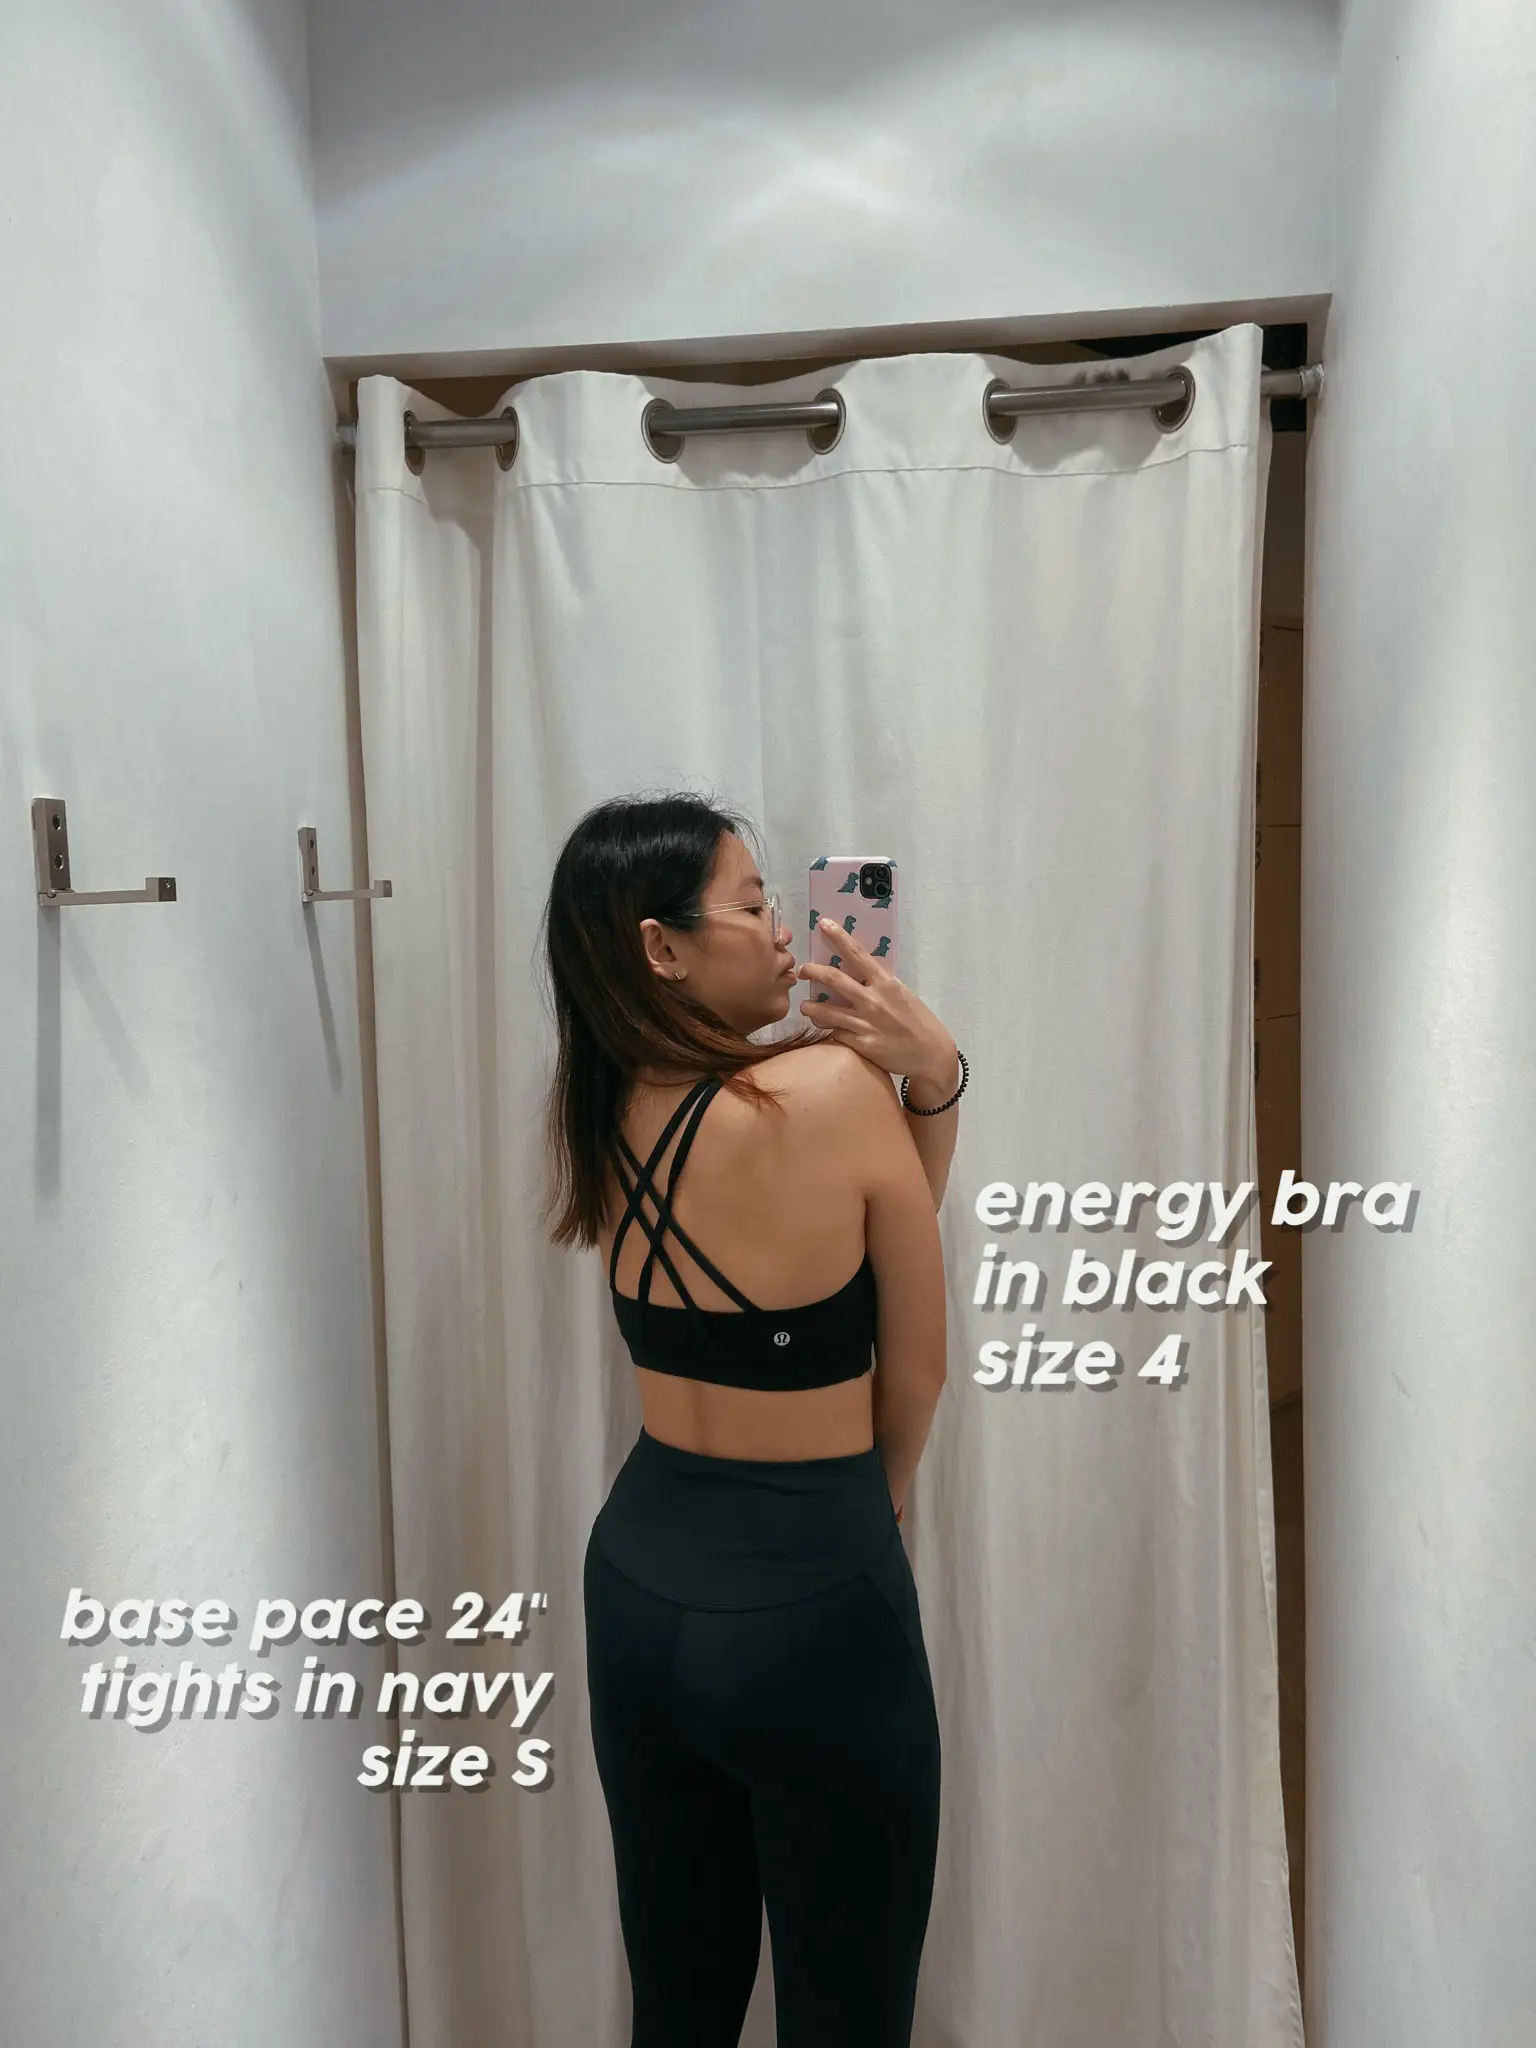 Had a great leg day in these lululemon InStill HR tights and Energy Bra  High Neck : r/lululemon